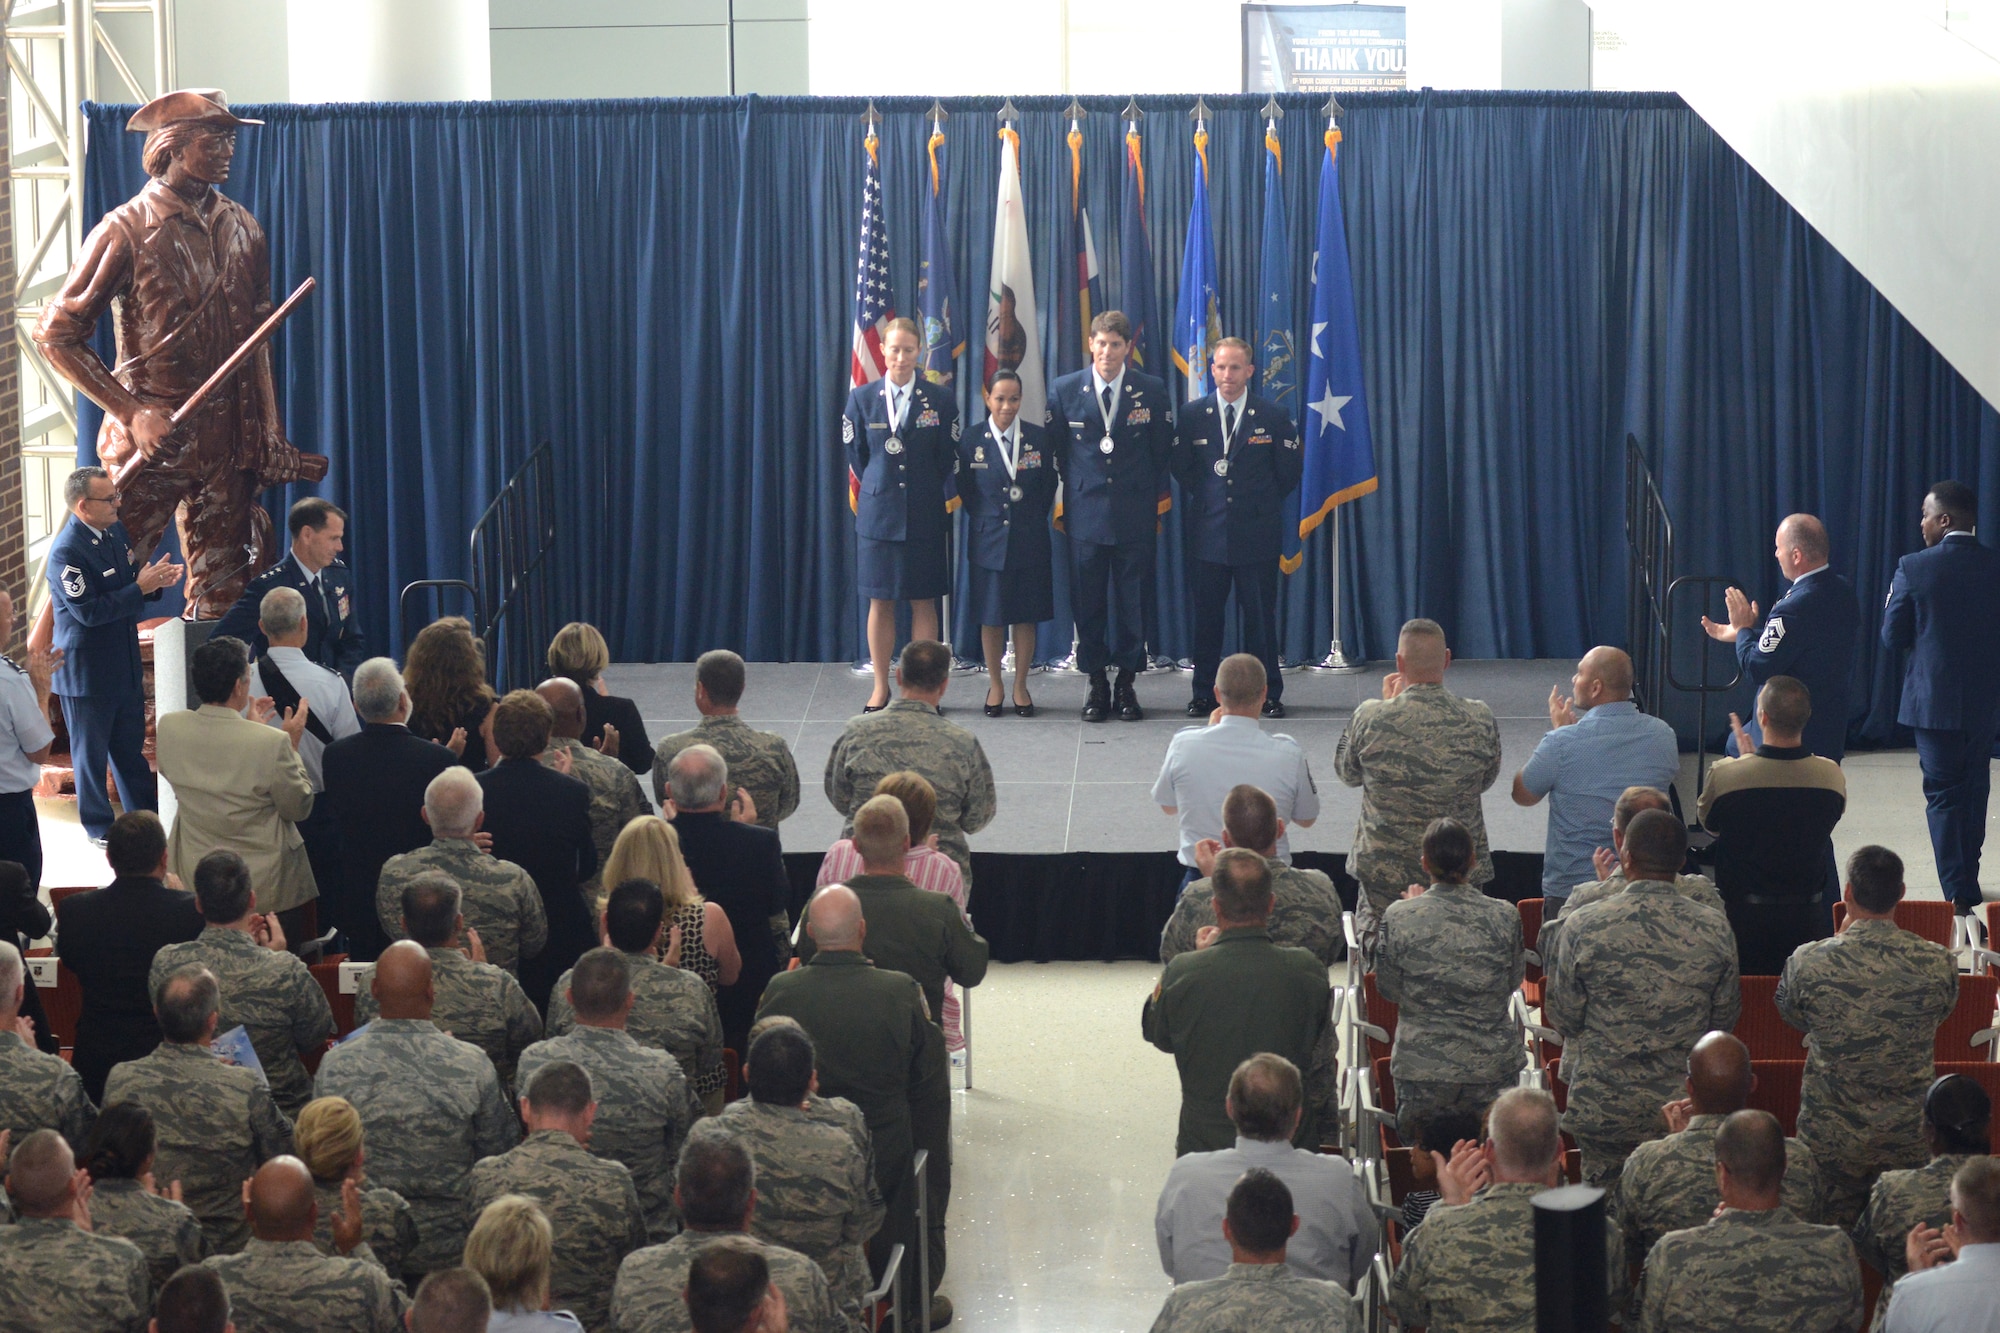 The Air National Guard's 2015 Outstanding Airmen of the Year are recognized during a director's all call at the Air National Guard Readiness Center on Joint Base Andrews, Md., August 6, 2015. The all call was part of Focus on the Force Week, a series of events highlighting the importance of professional development and recognizing the accomplishments of the enlisted force. (U.S. Air National Guard photo by Staff Sgt. John E. Hillier/released)